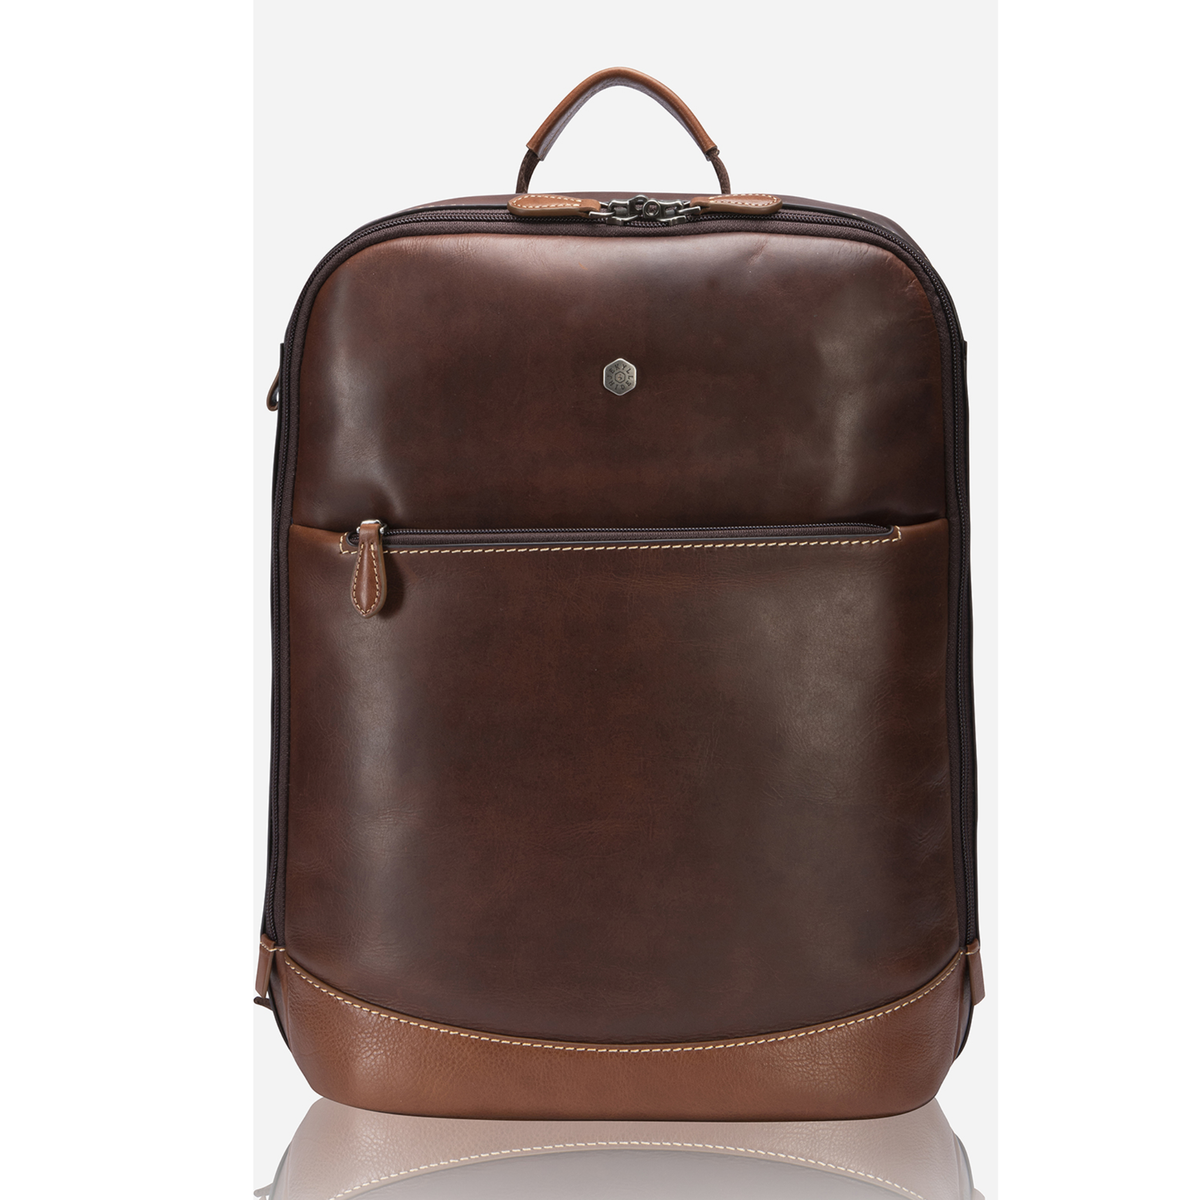 JEKYLL & HIDE SINGLE COMPARTMENT BACKPACK- SOHO TWO TONE